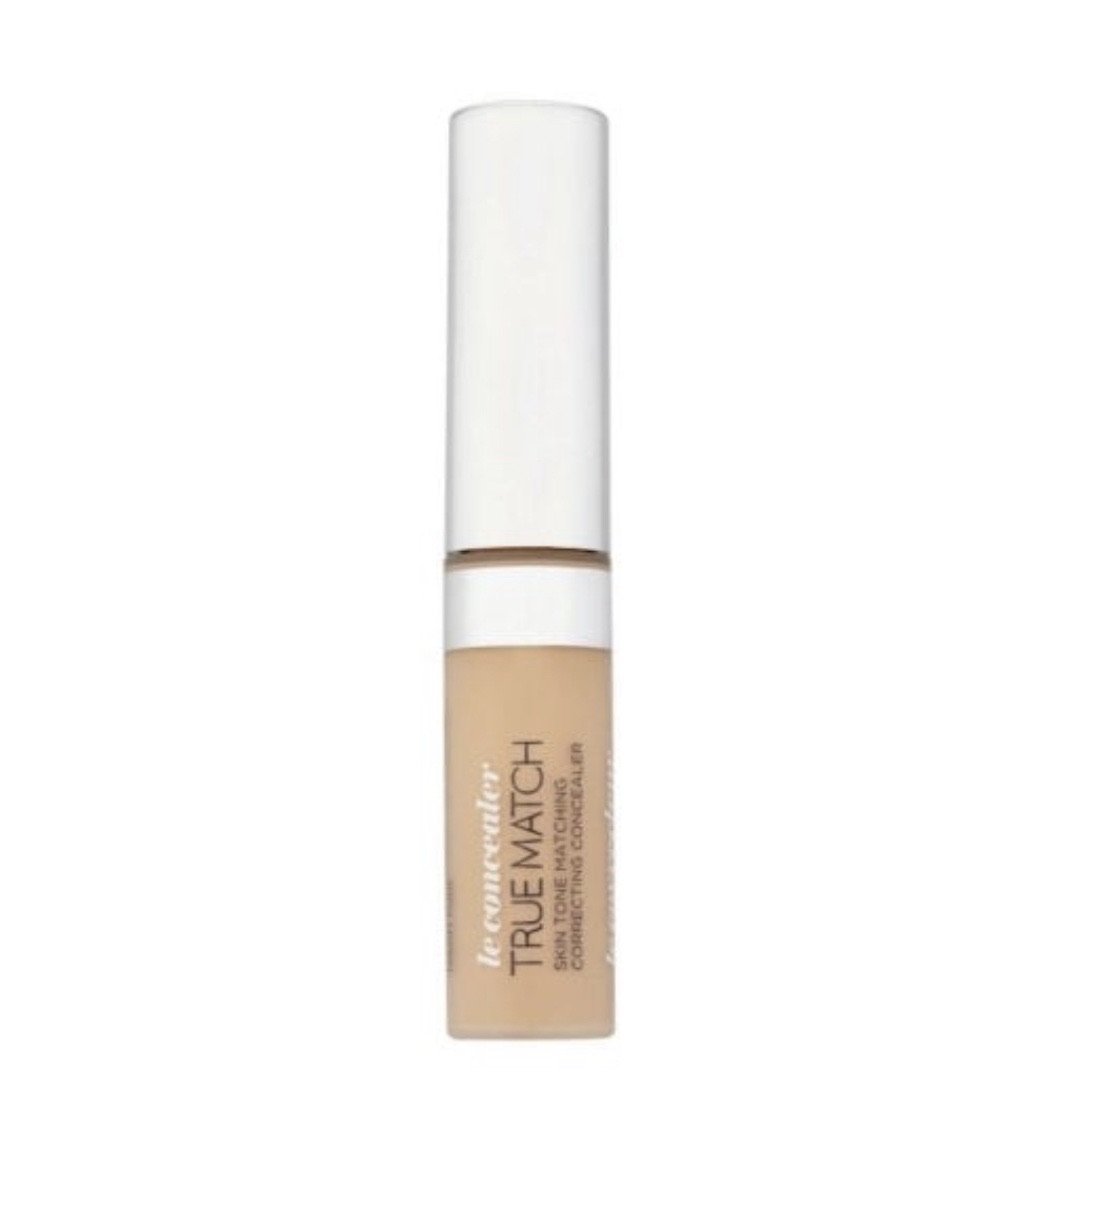 L'Oreal Perfect Match Concealer